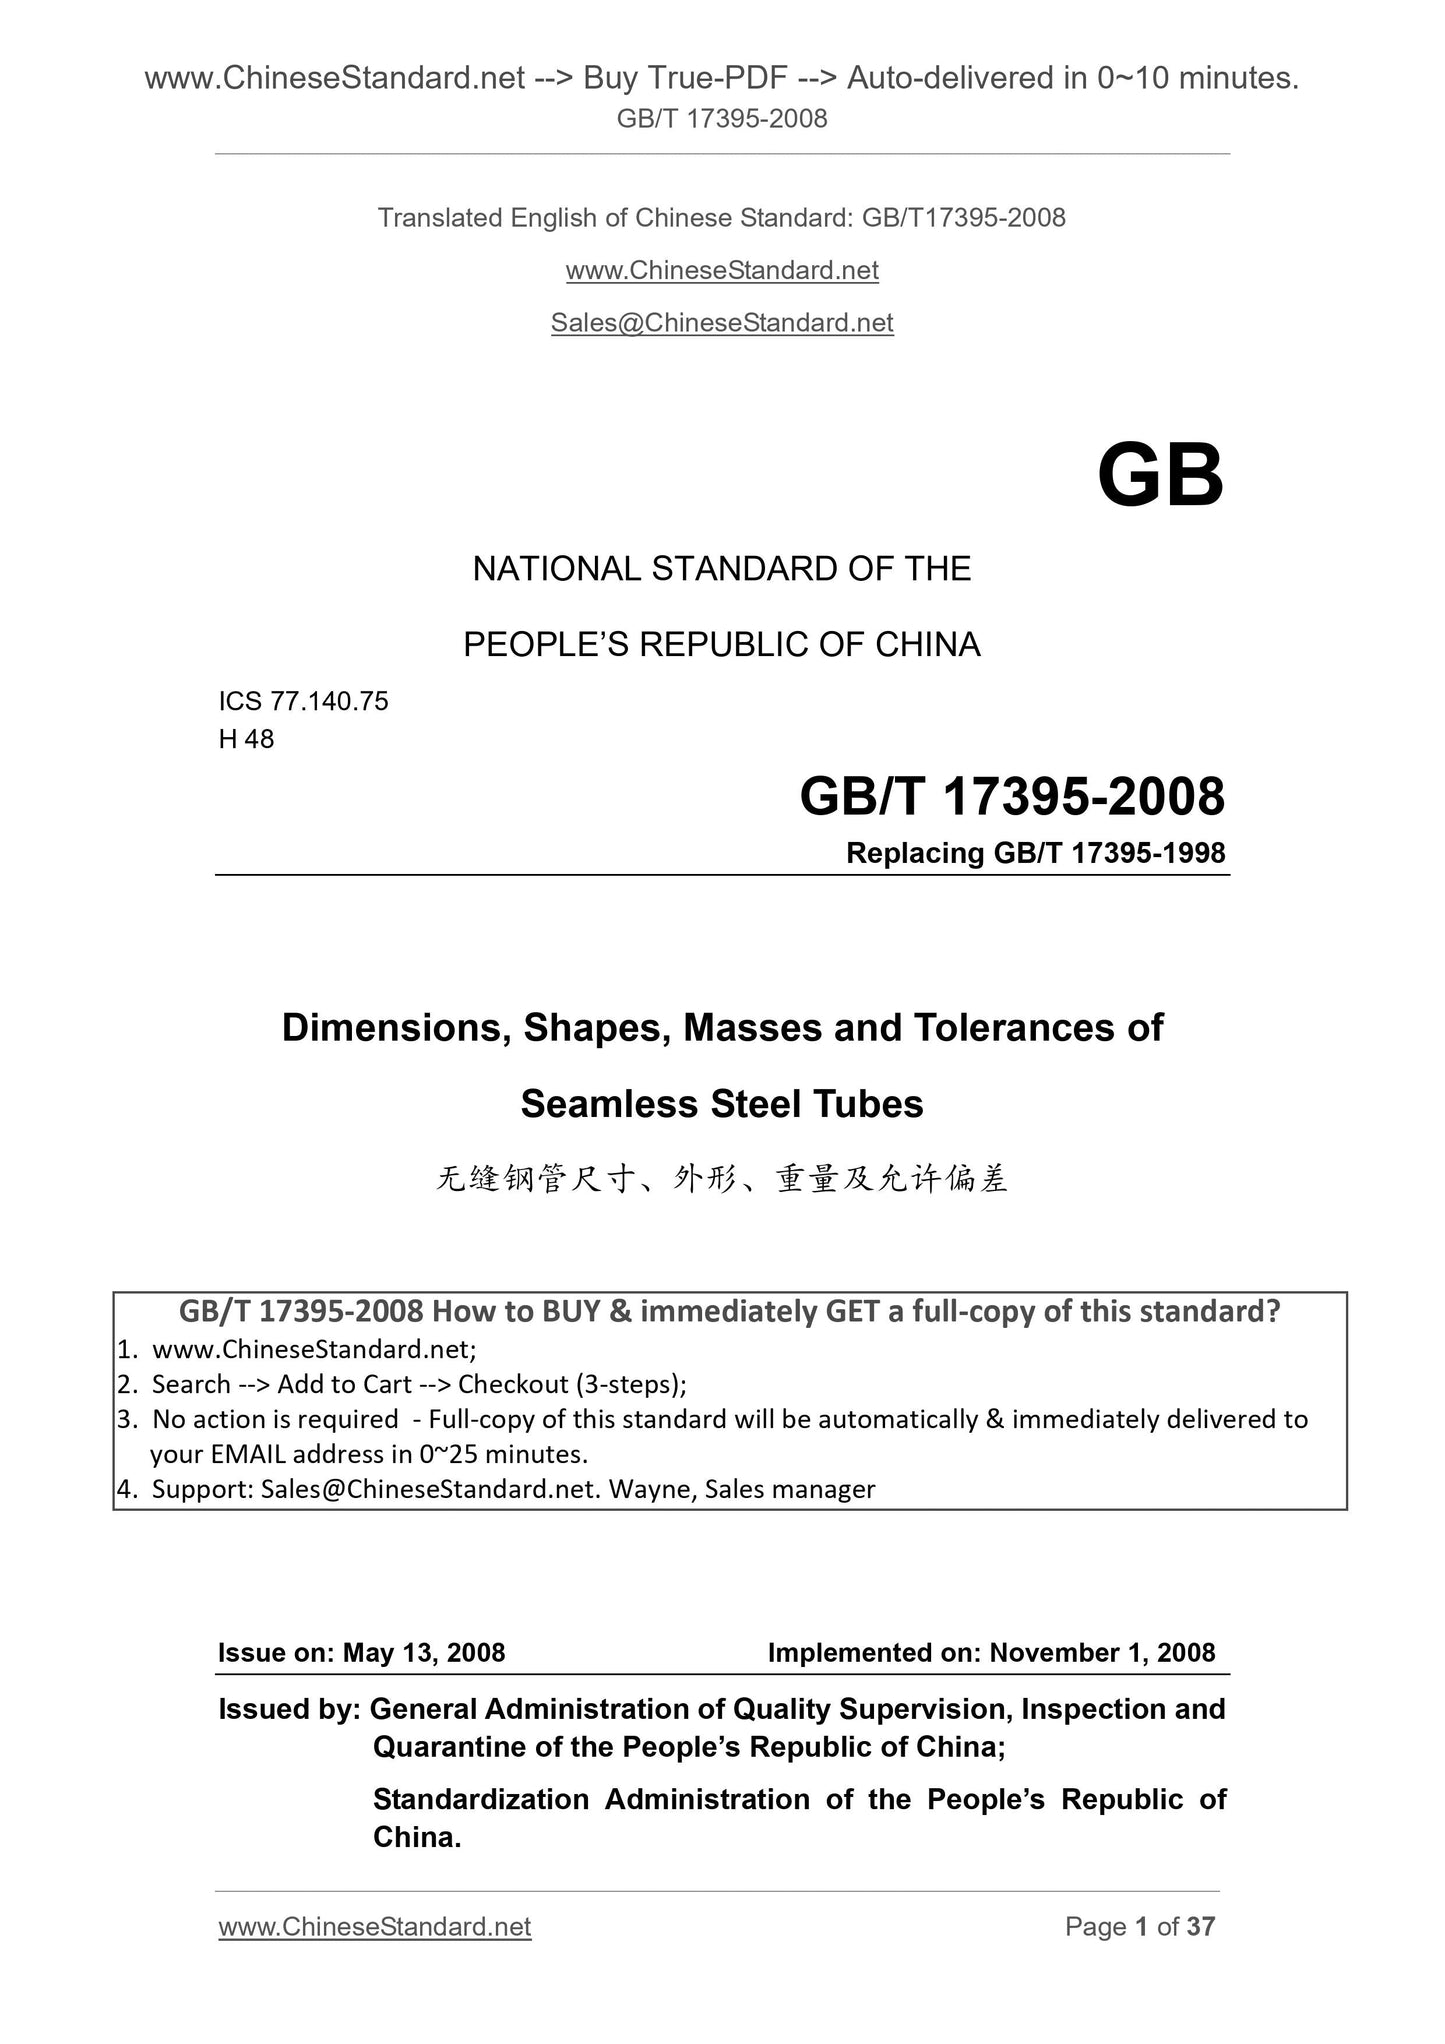 GB/T 17395-2008 Page 1